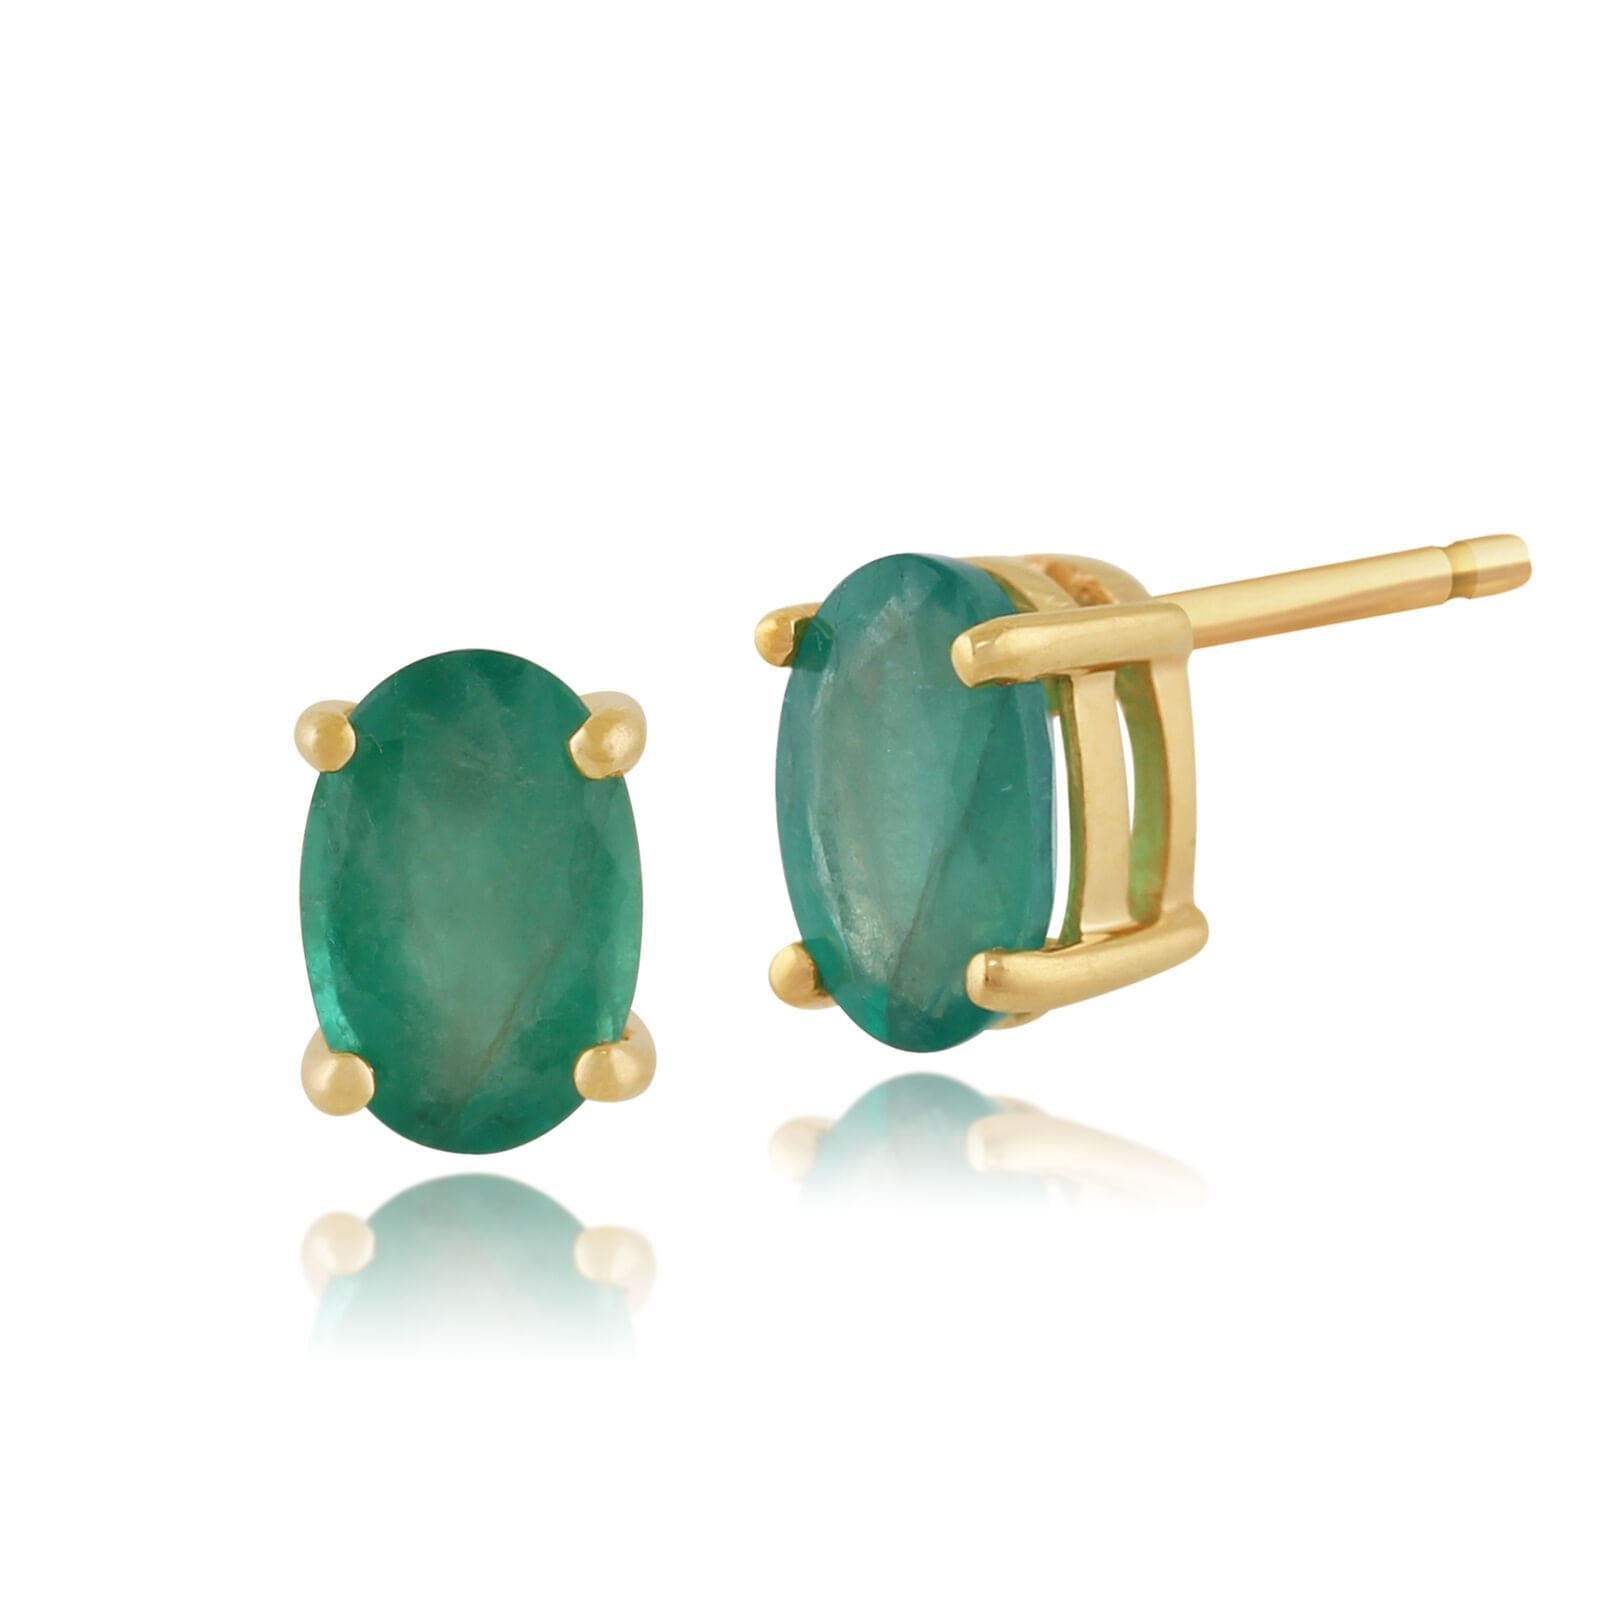 26892 Classic Oval Emerald Stud Earrings in 9ct Yellow Gold 6x4mm 1